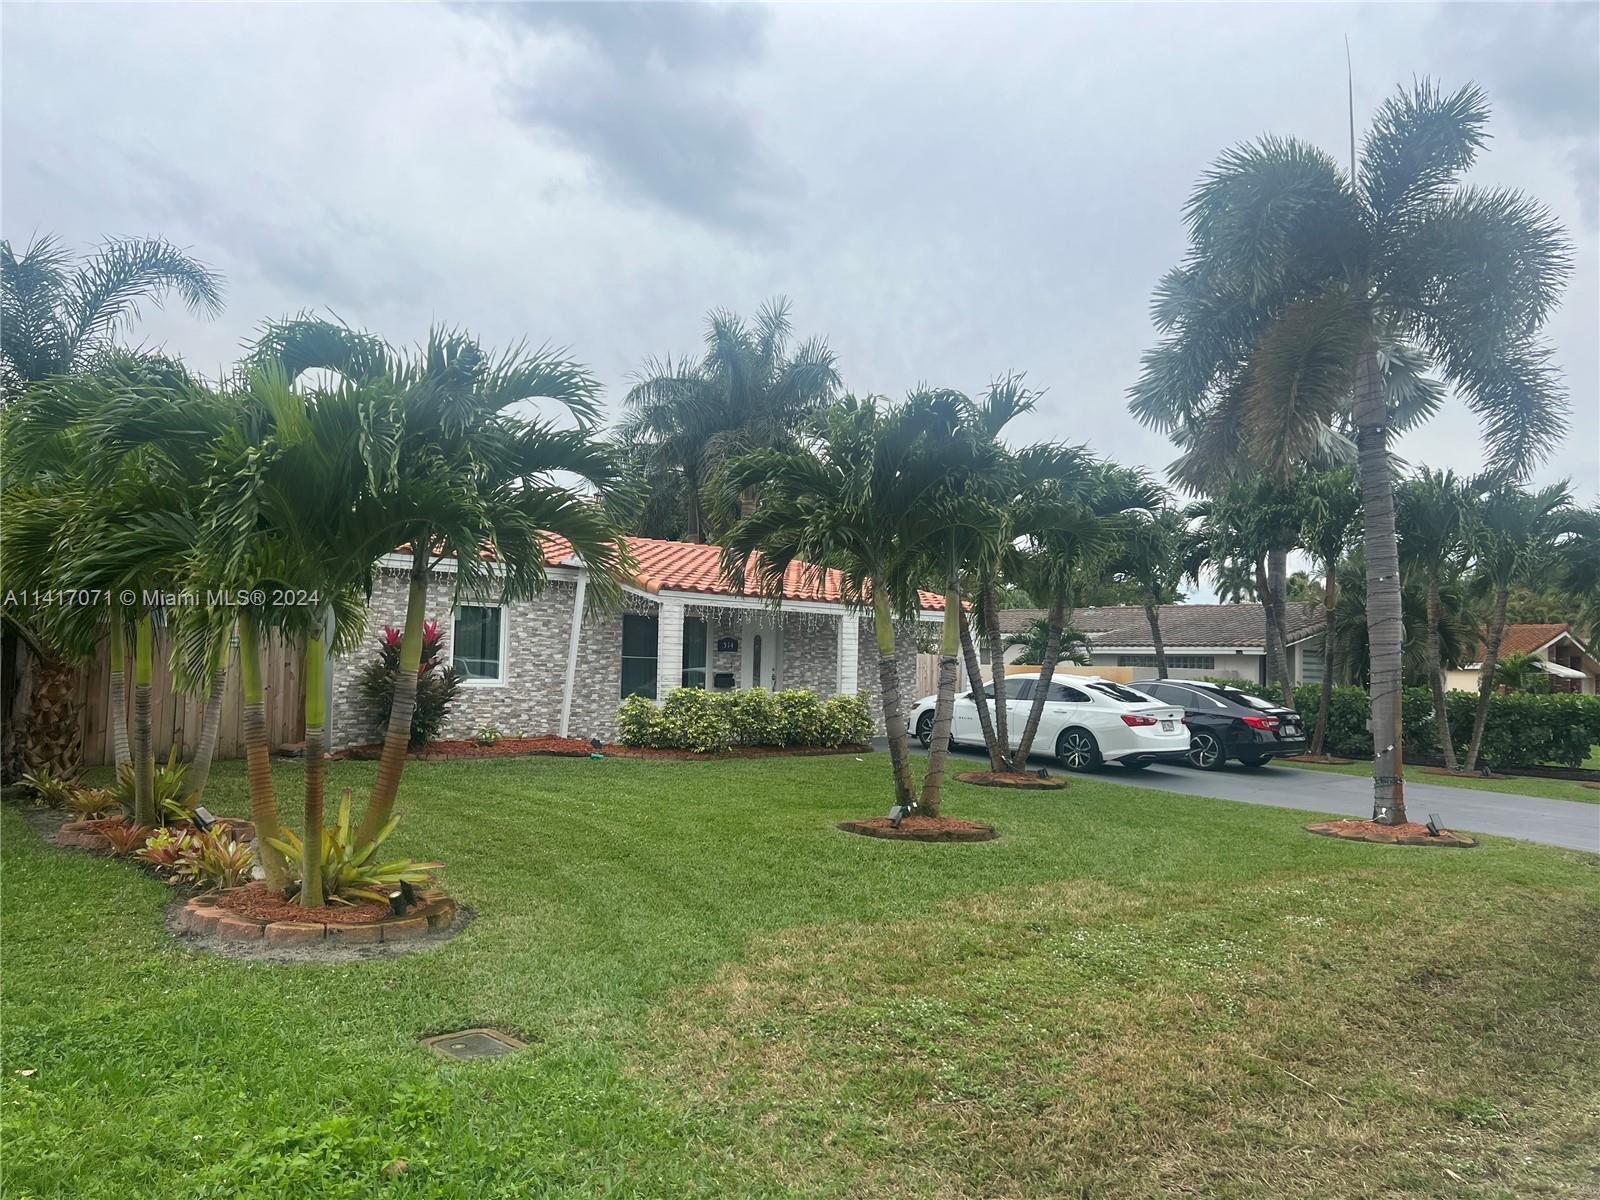 Property for Sale at 514 Nw 36th St St, Oakland Park, Miami-Dade County, Florida - Bedrooms: 4 
Bathrooms: 2  - $669,000